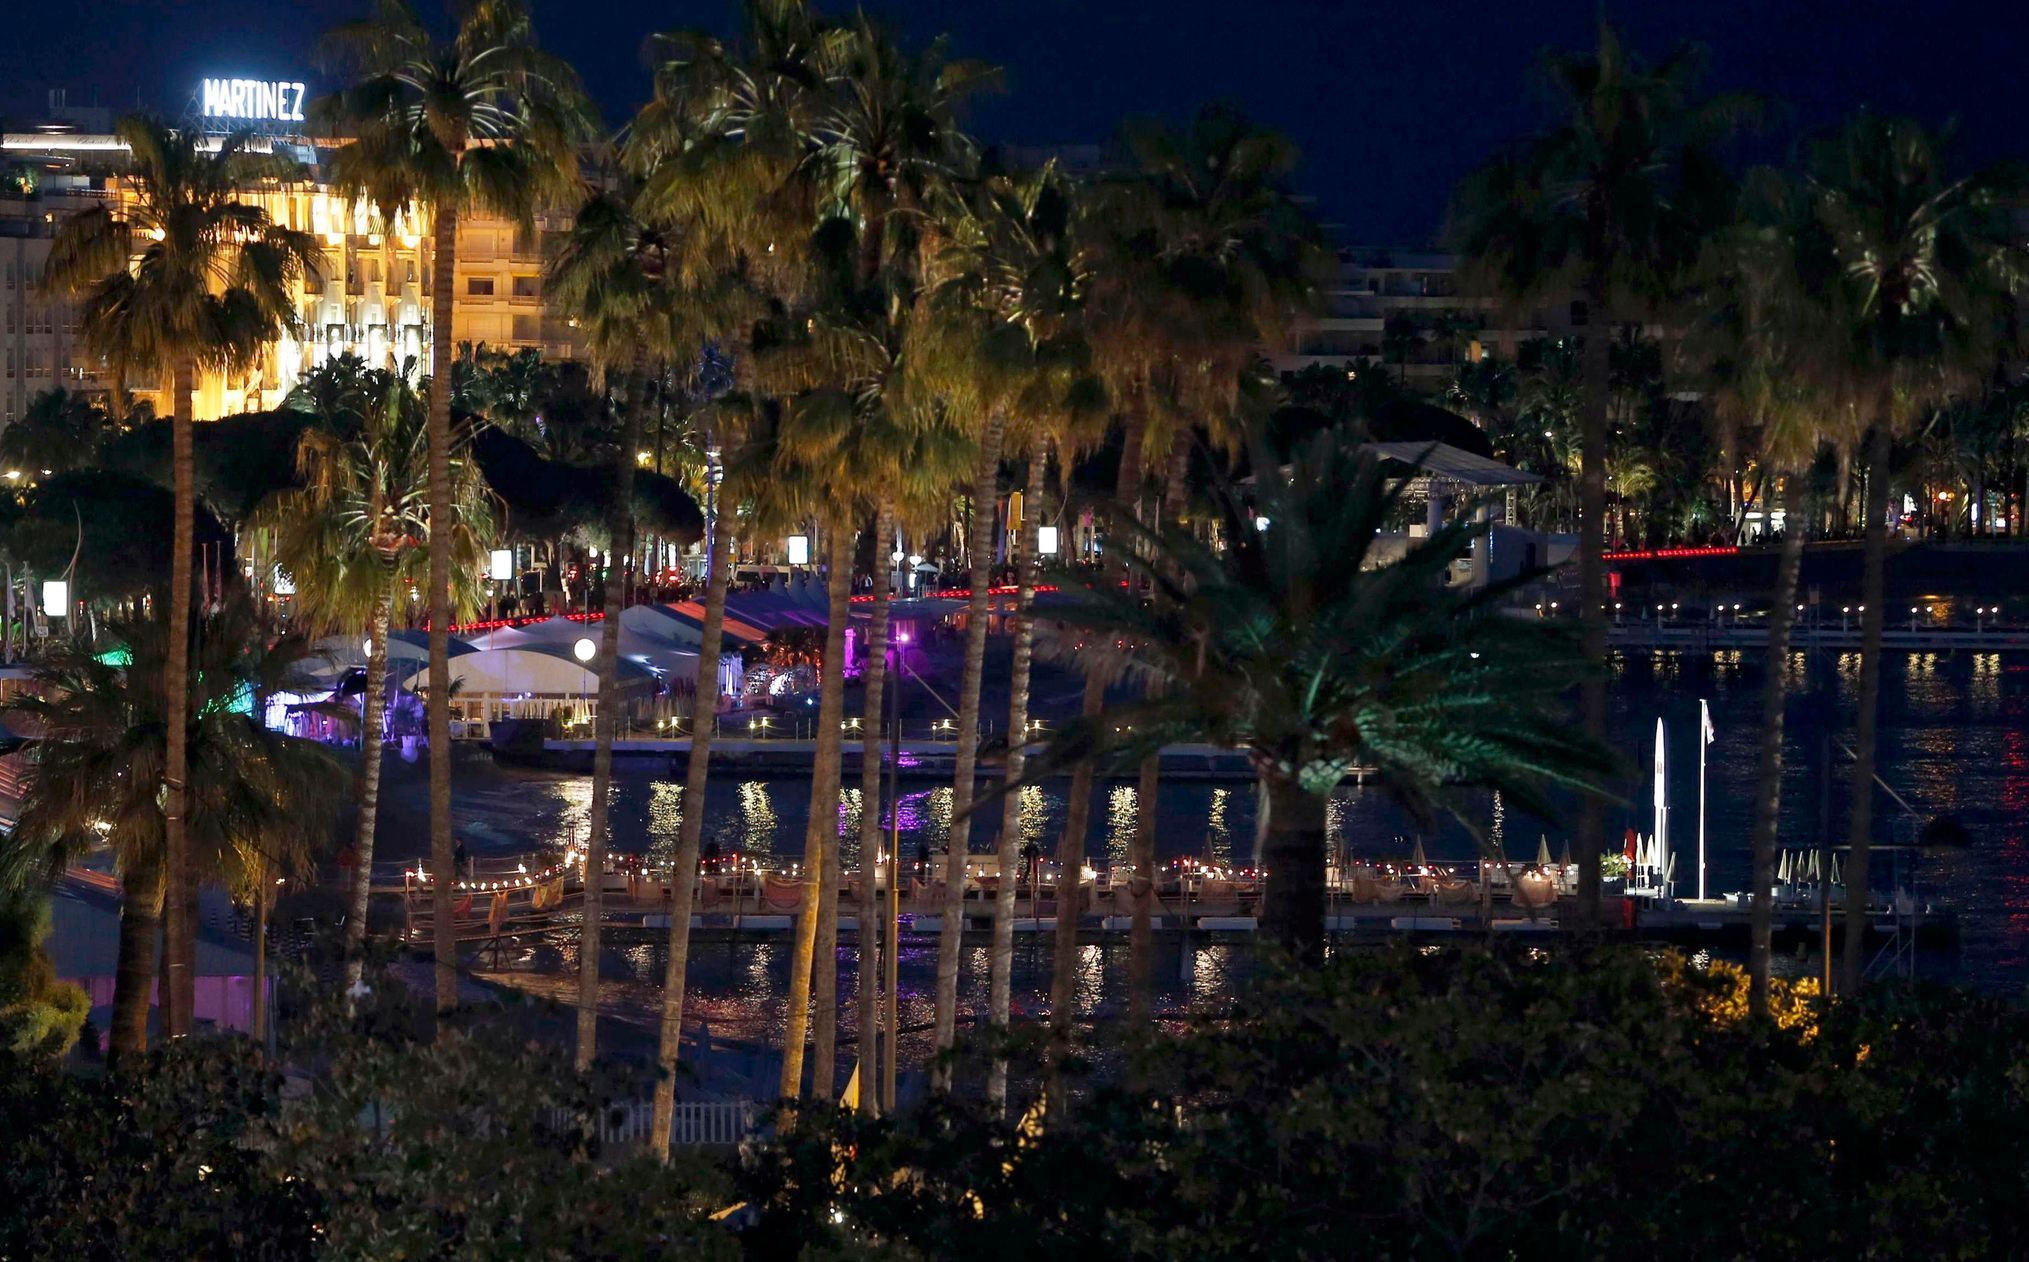 A general view shows the Grand Hyatt Cannes Hotel Martinez and palm trees on the Croisette at night during the 67th Cannes Film Festival in Cannes